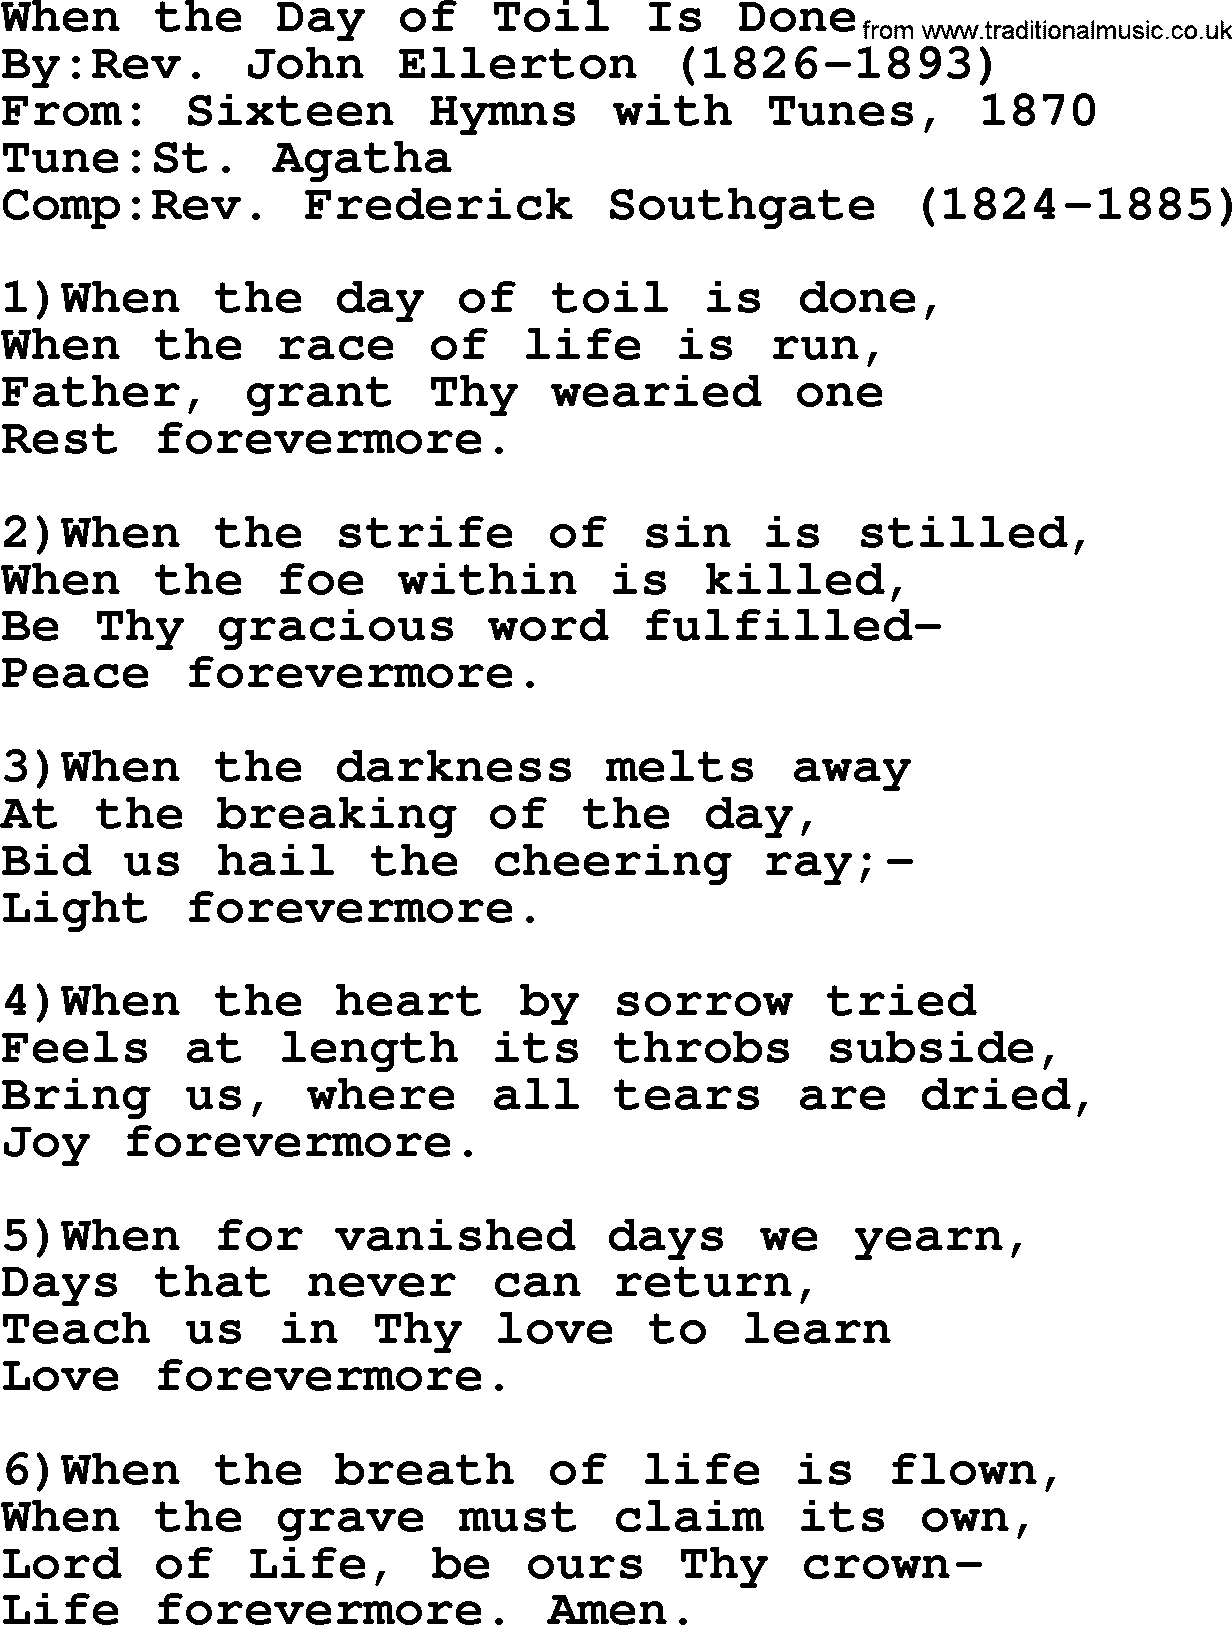 Methodist Hymn: When The Day Of Toil Is Done, lyrics